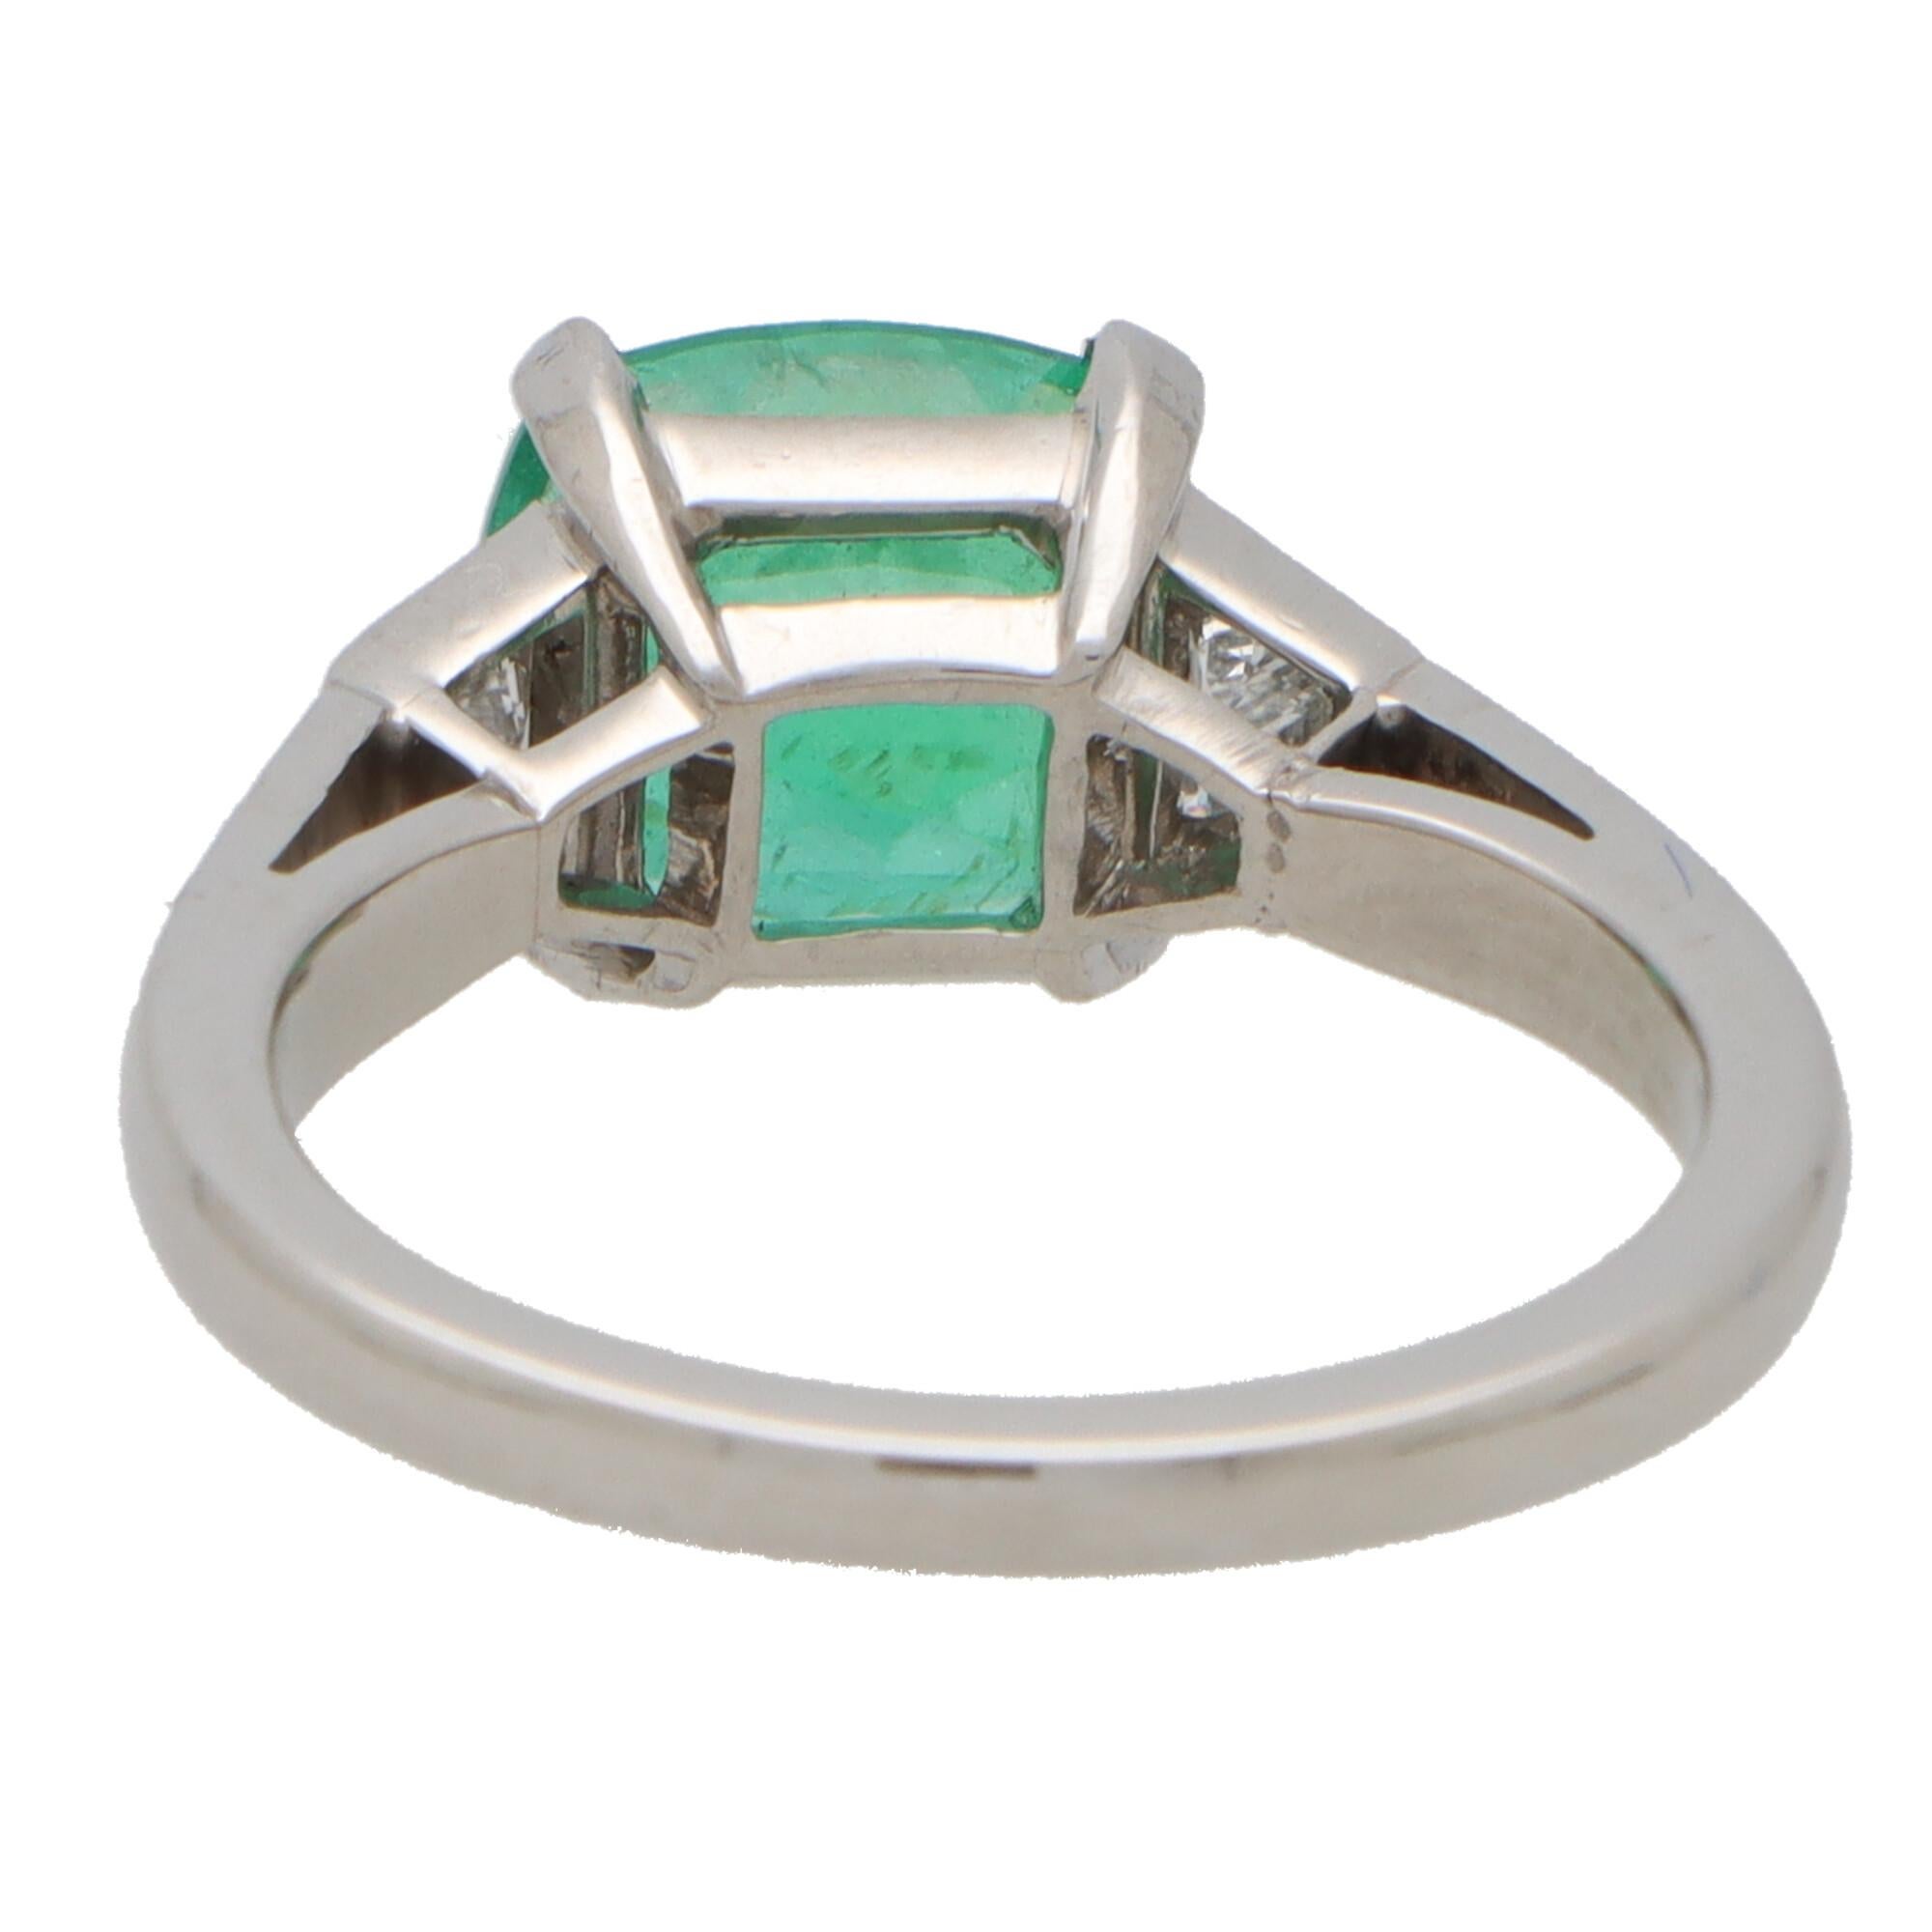 Cushion Cut Vintage Emerald and Diamond Trilogy Ring Set in Platinum 